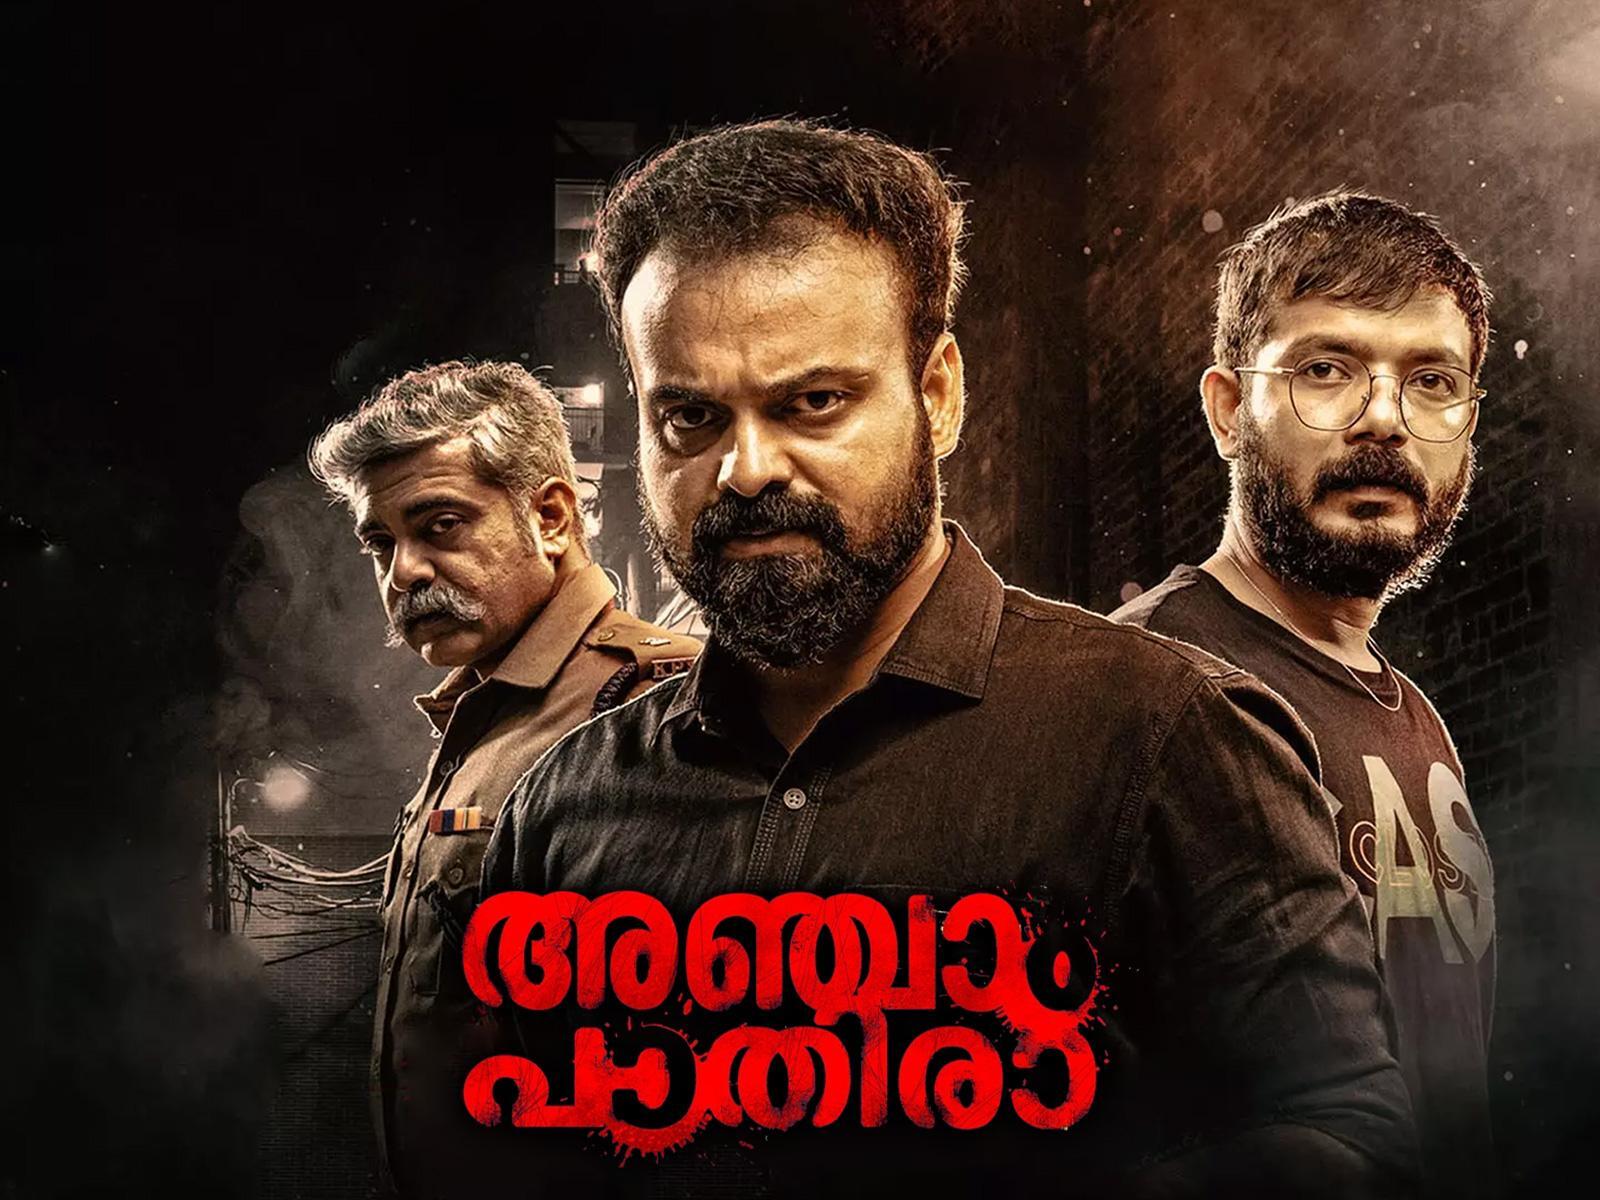 dennis bolin recommends malayalam full movie download sites pic